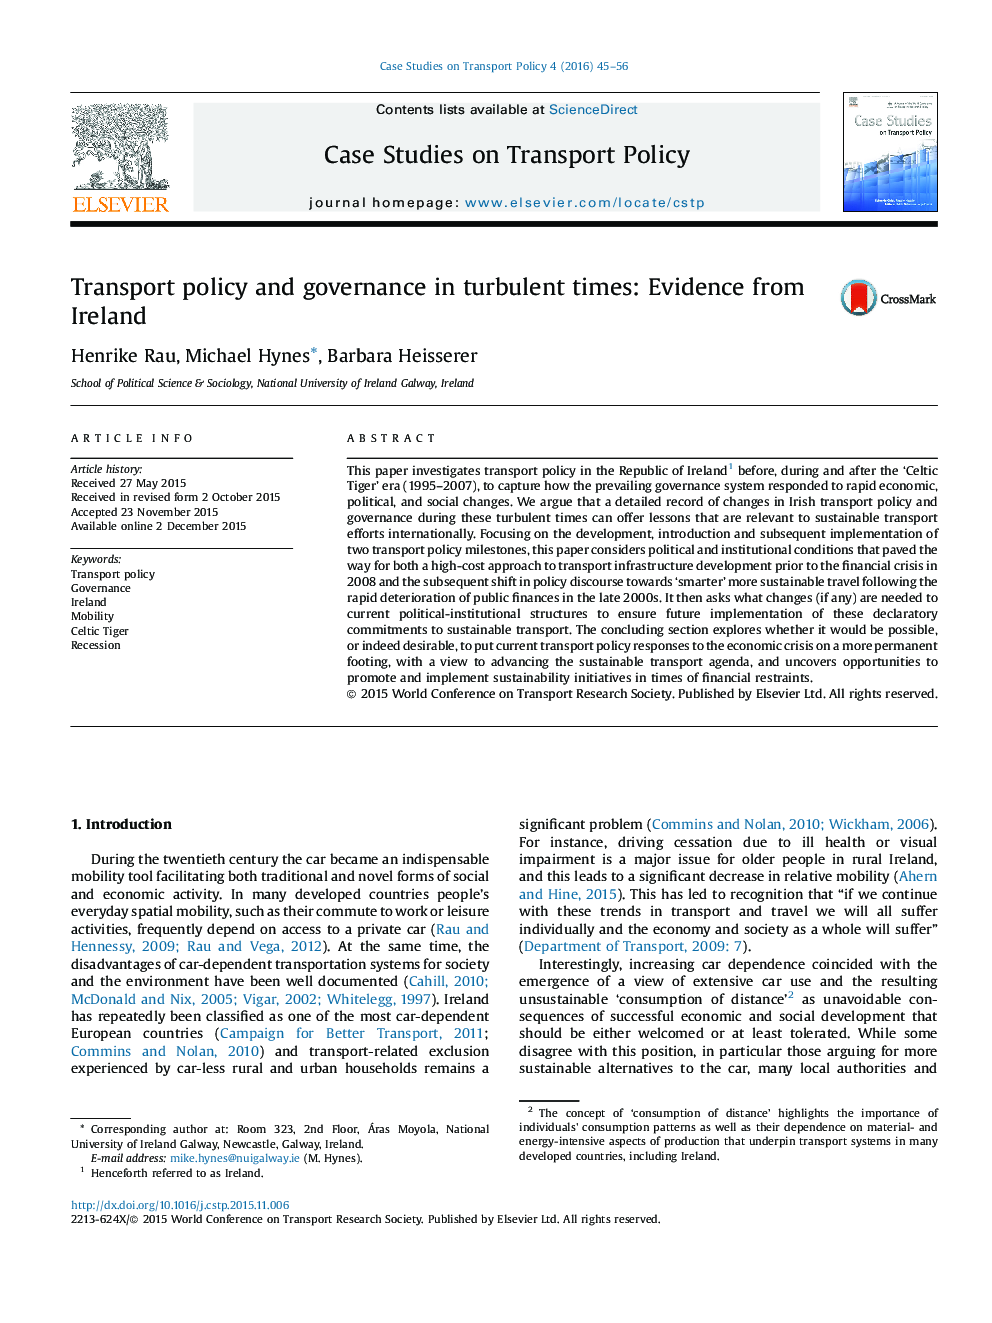 Transport policy and governance in turbulent times: Evidence from Ireland